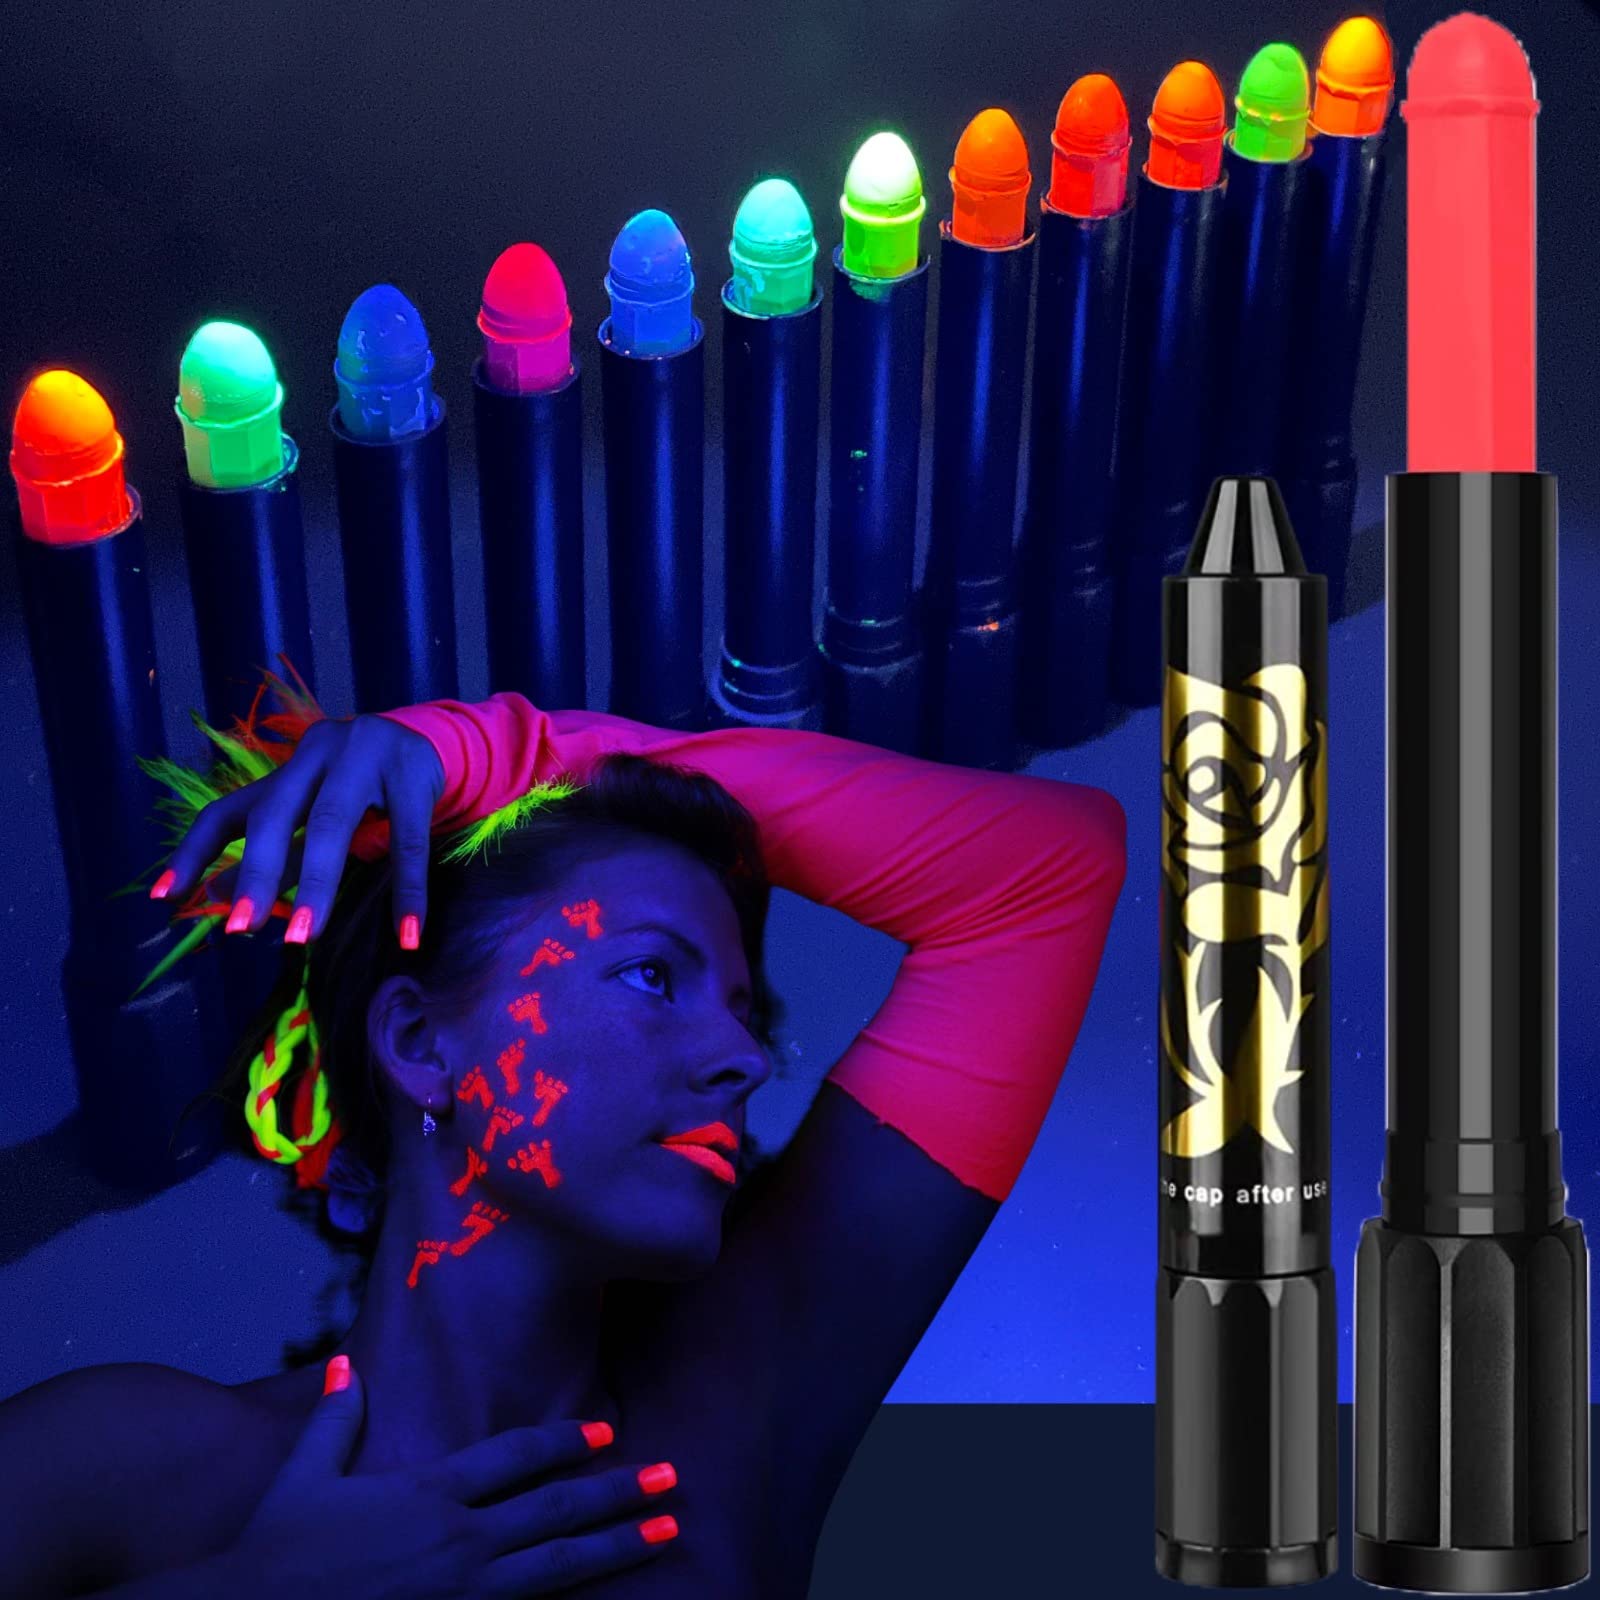 Glow in The Black Light UV Face Paint Crayon, Black Light Neon Face & Body  Paint Non Toxic Fluorescent Mardi Gras Halloween Makeup Marker for Kids